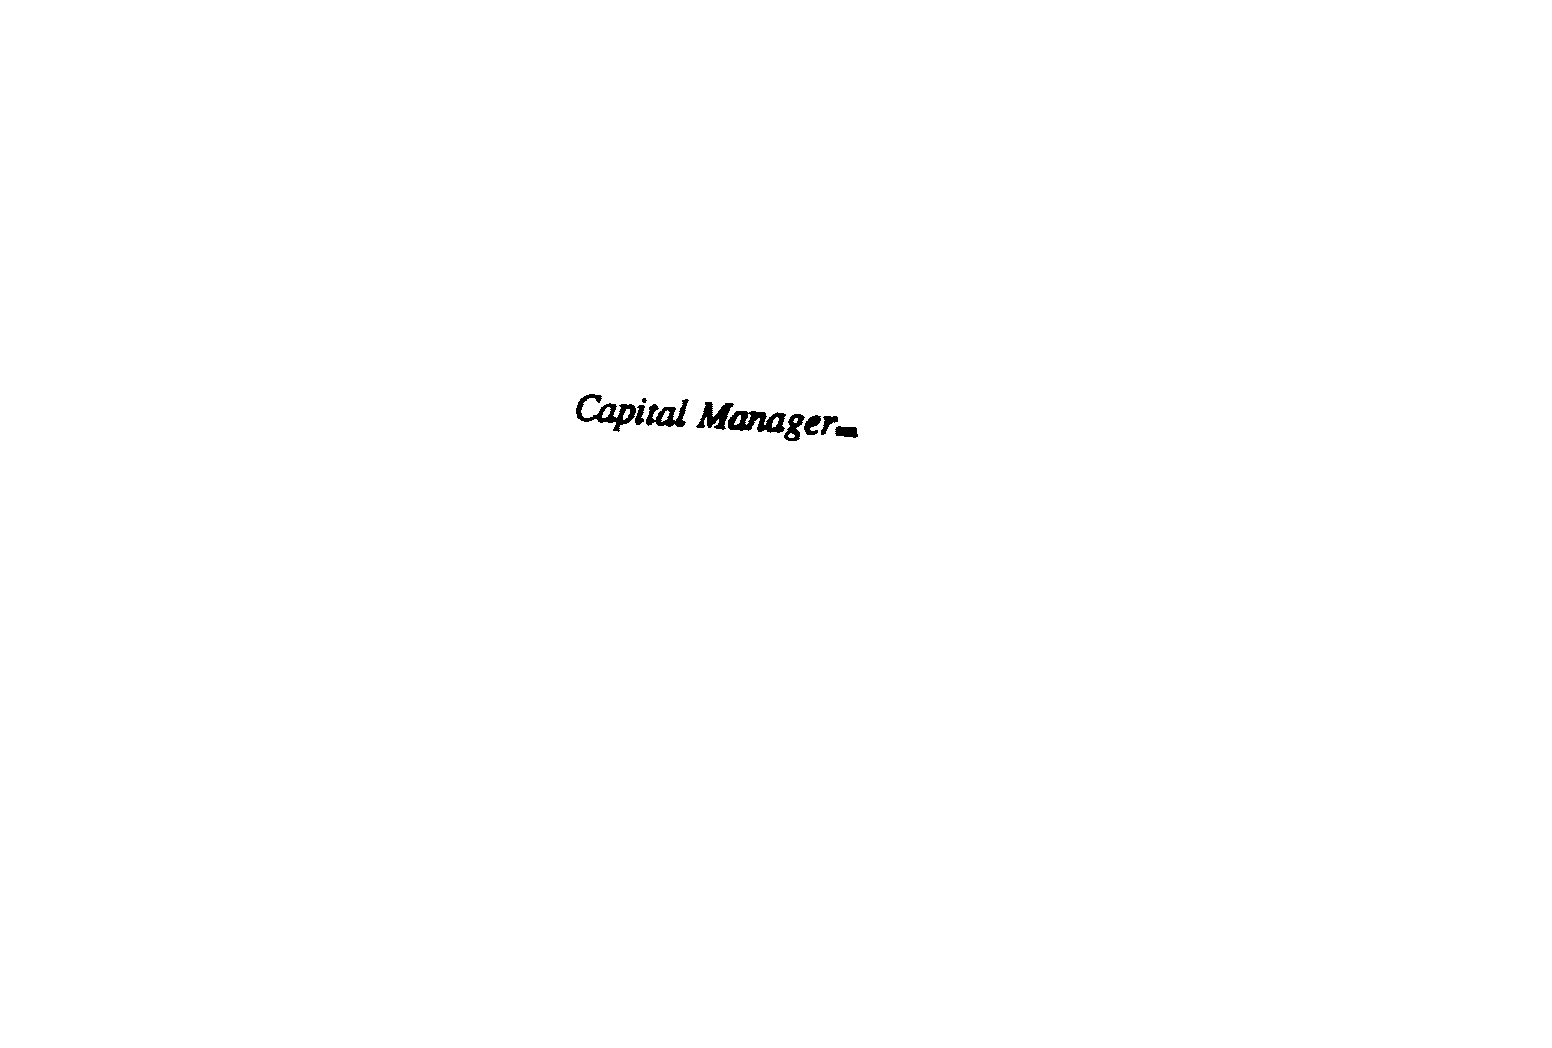  CAPITAL MANAGER